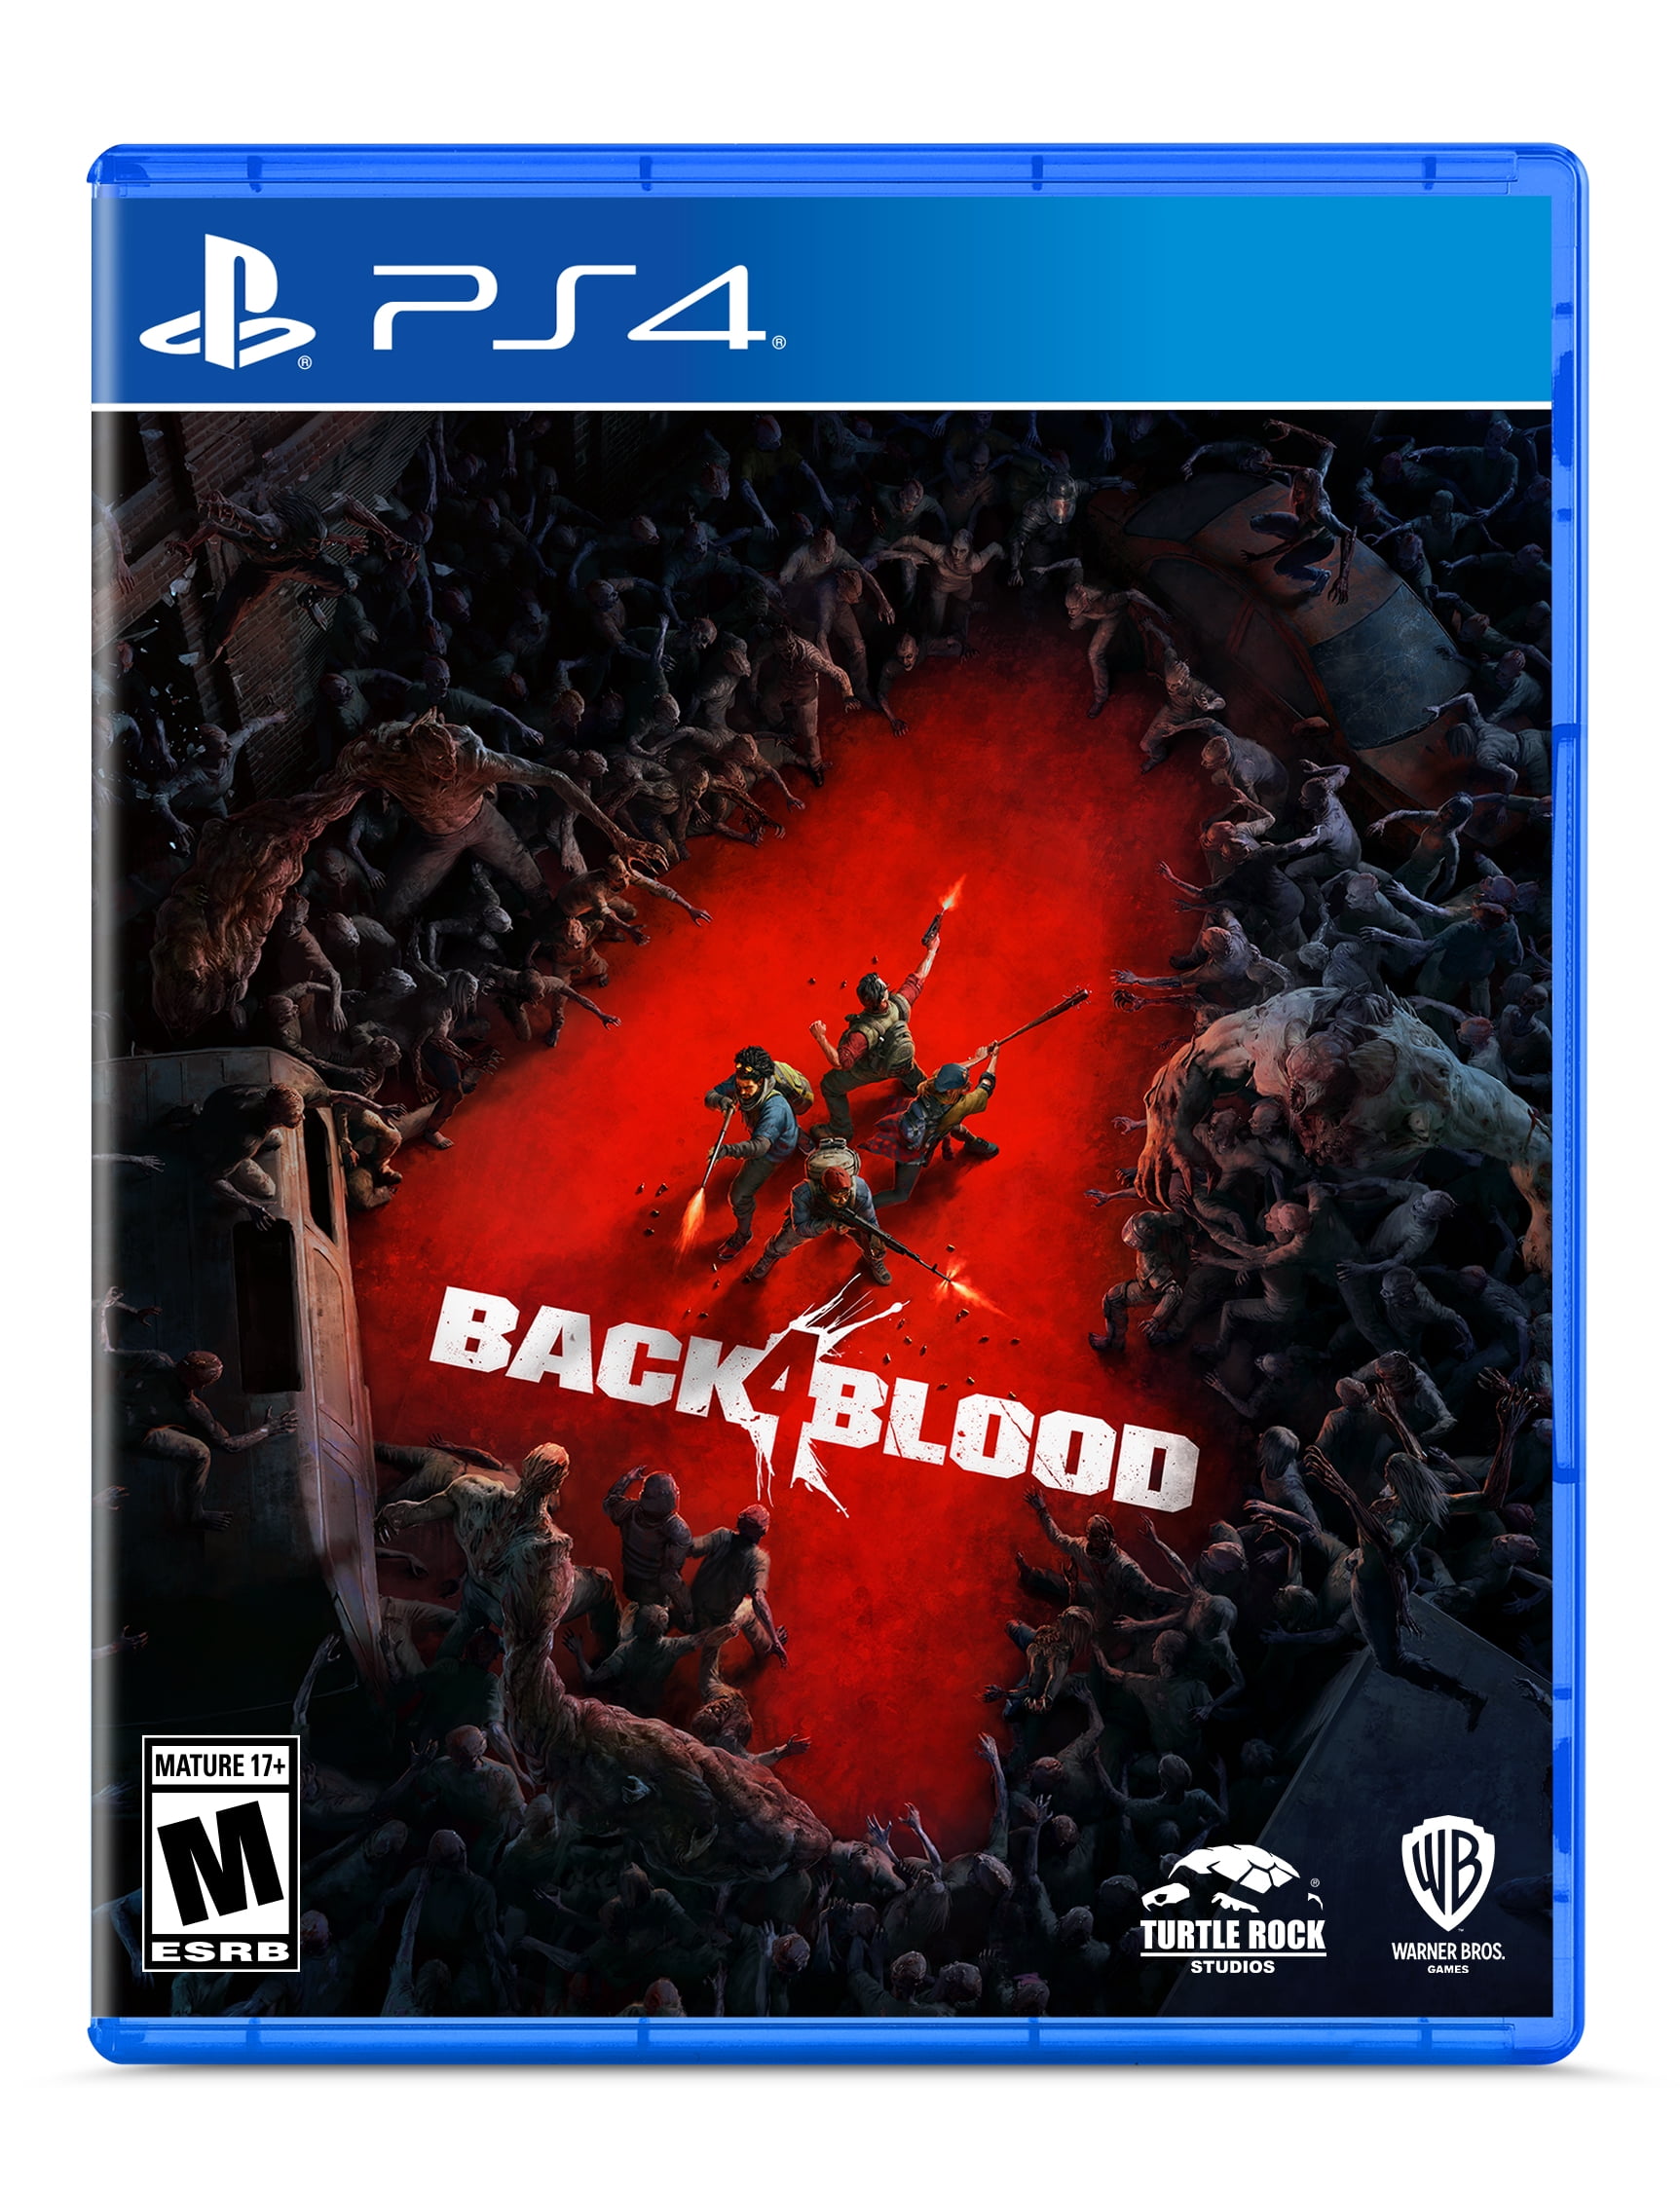 Back 4 Blood, Dragon Ball FighterZ, Life is Strange Free with PS